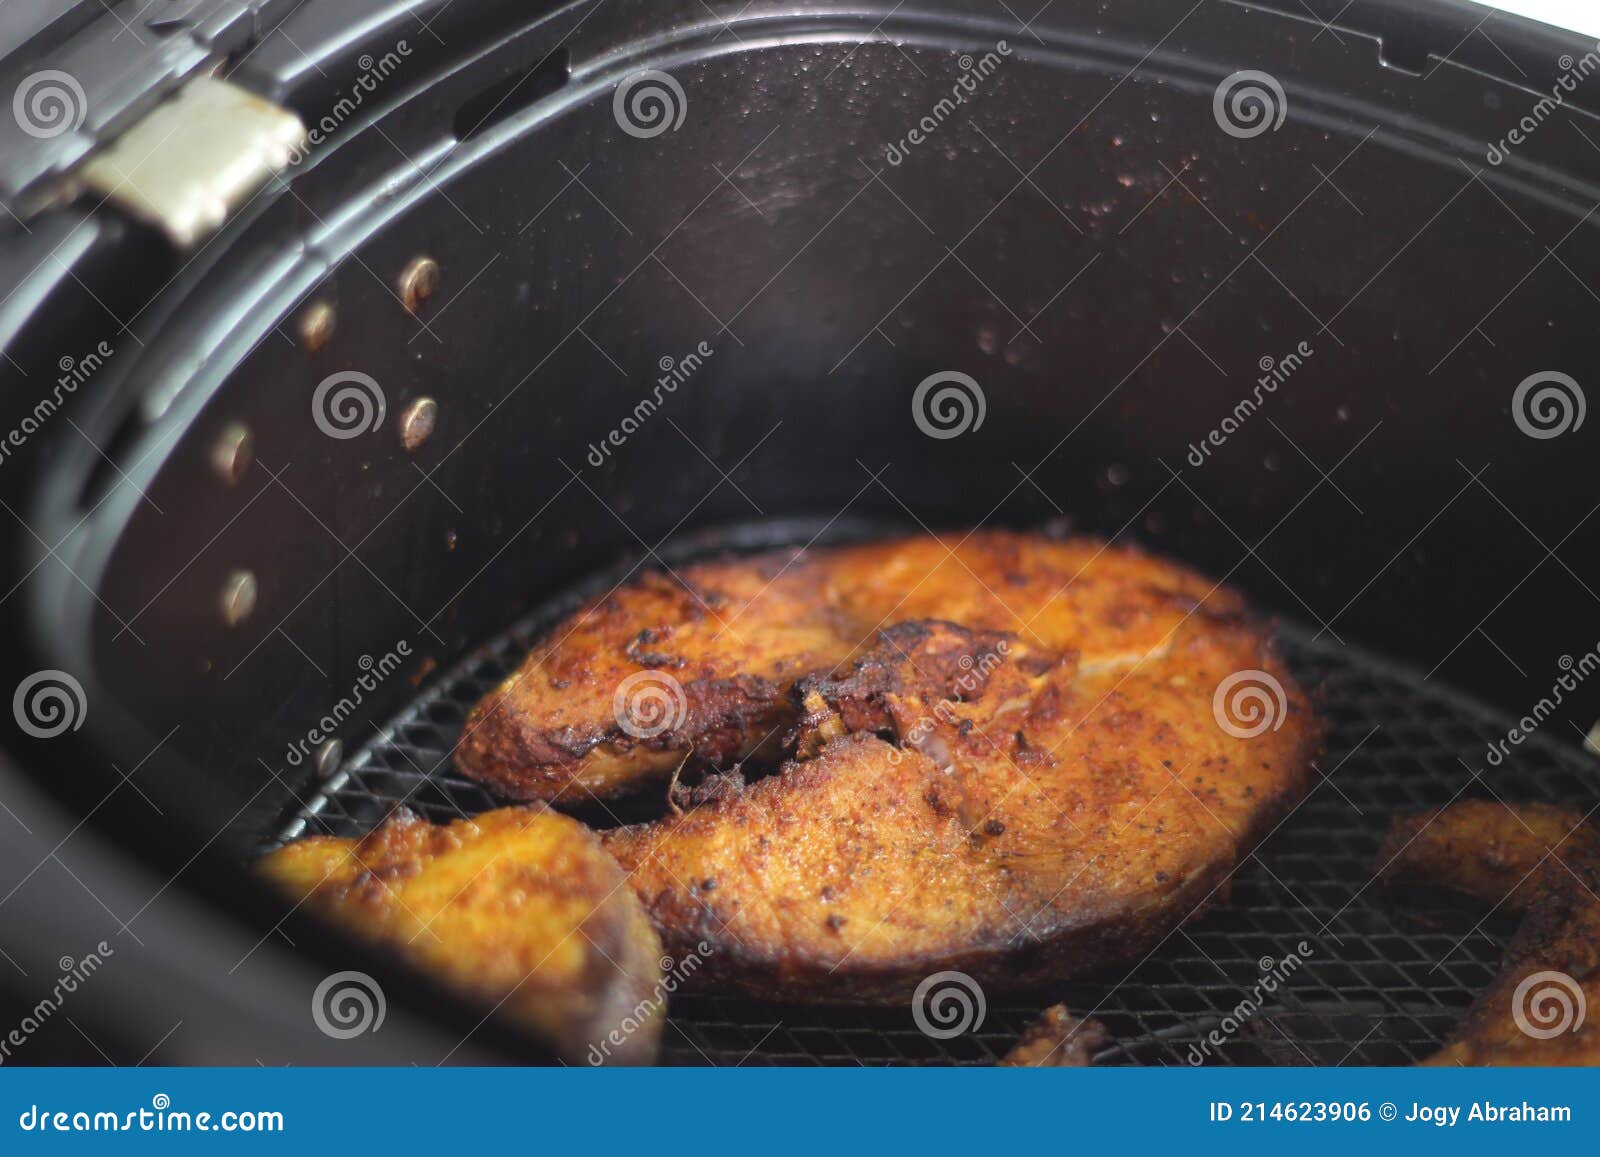 cobia fish inside the air fryer. in india it is called moda fish